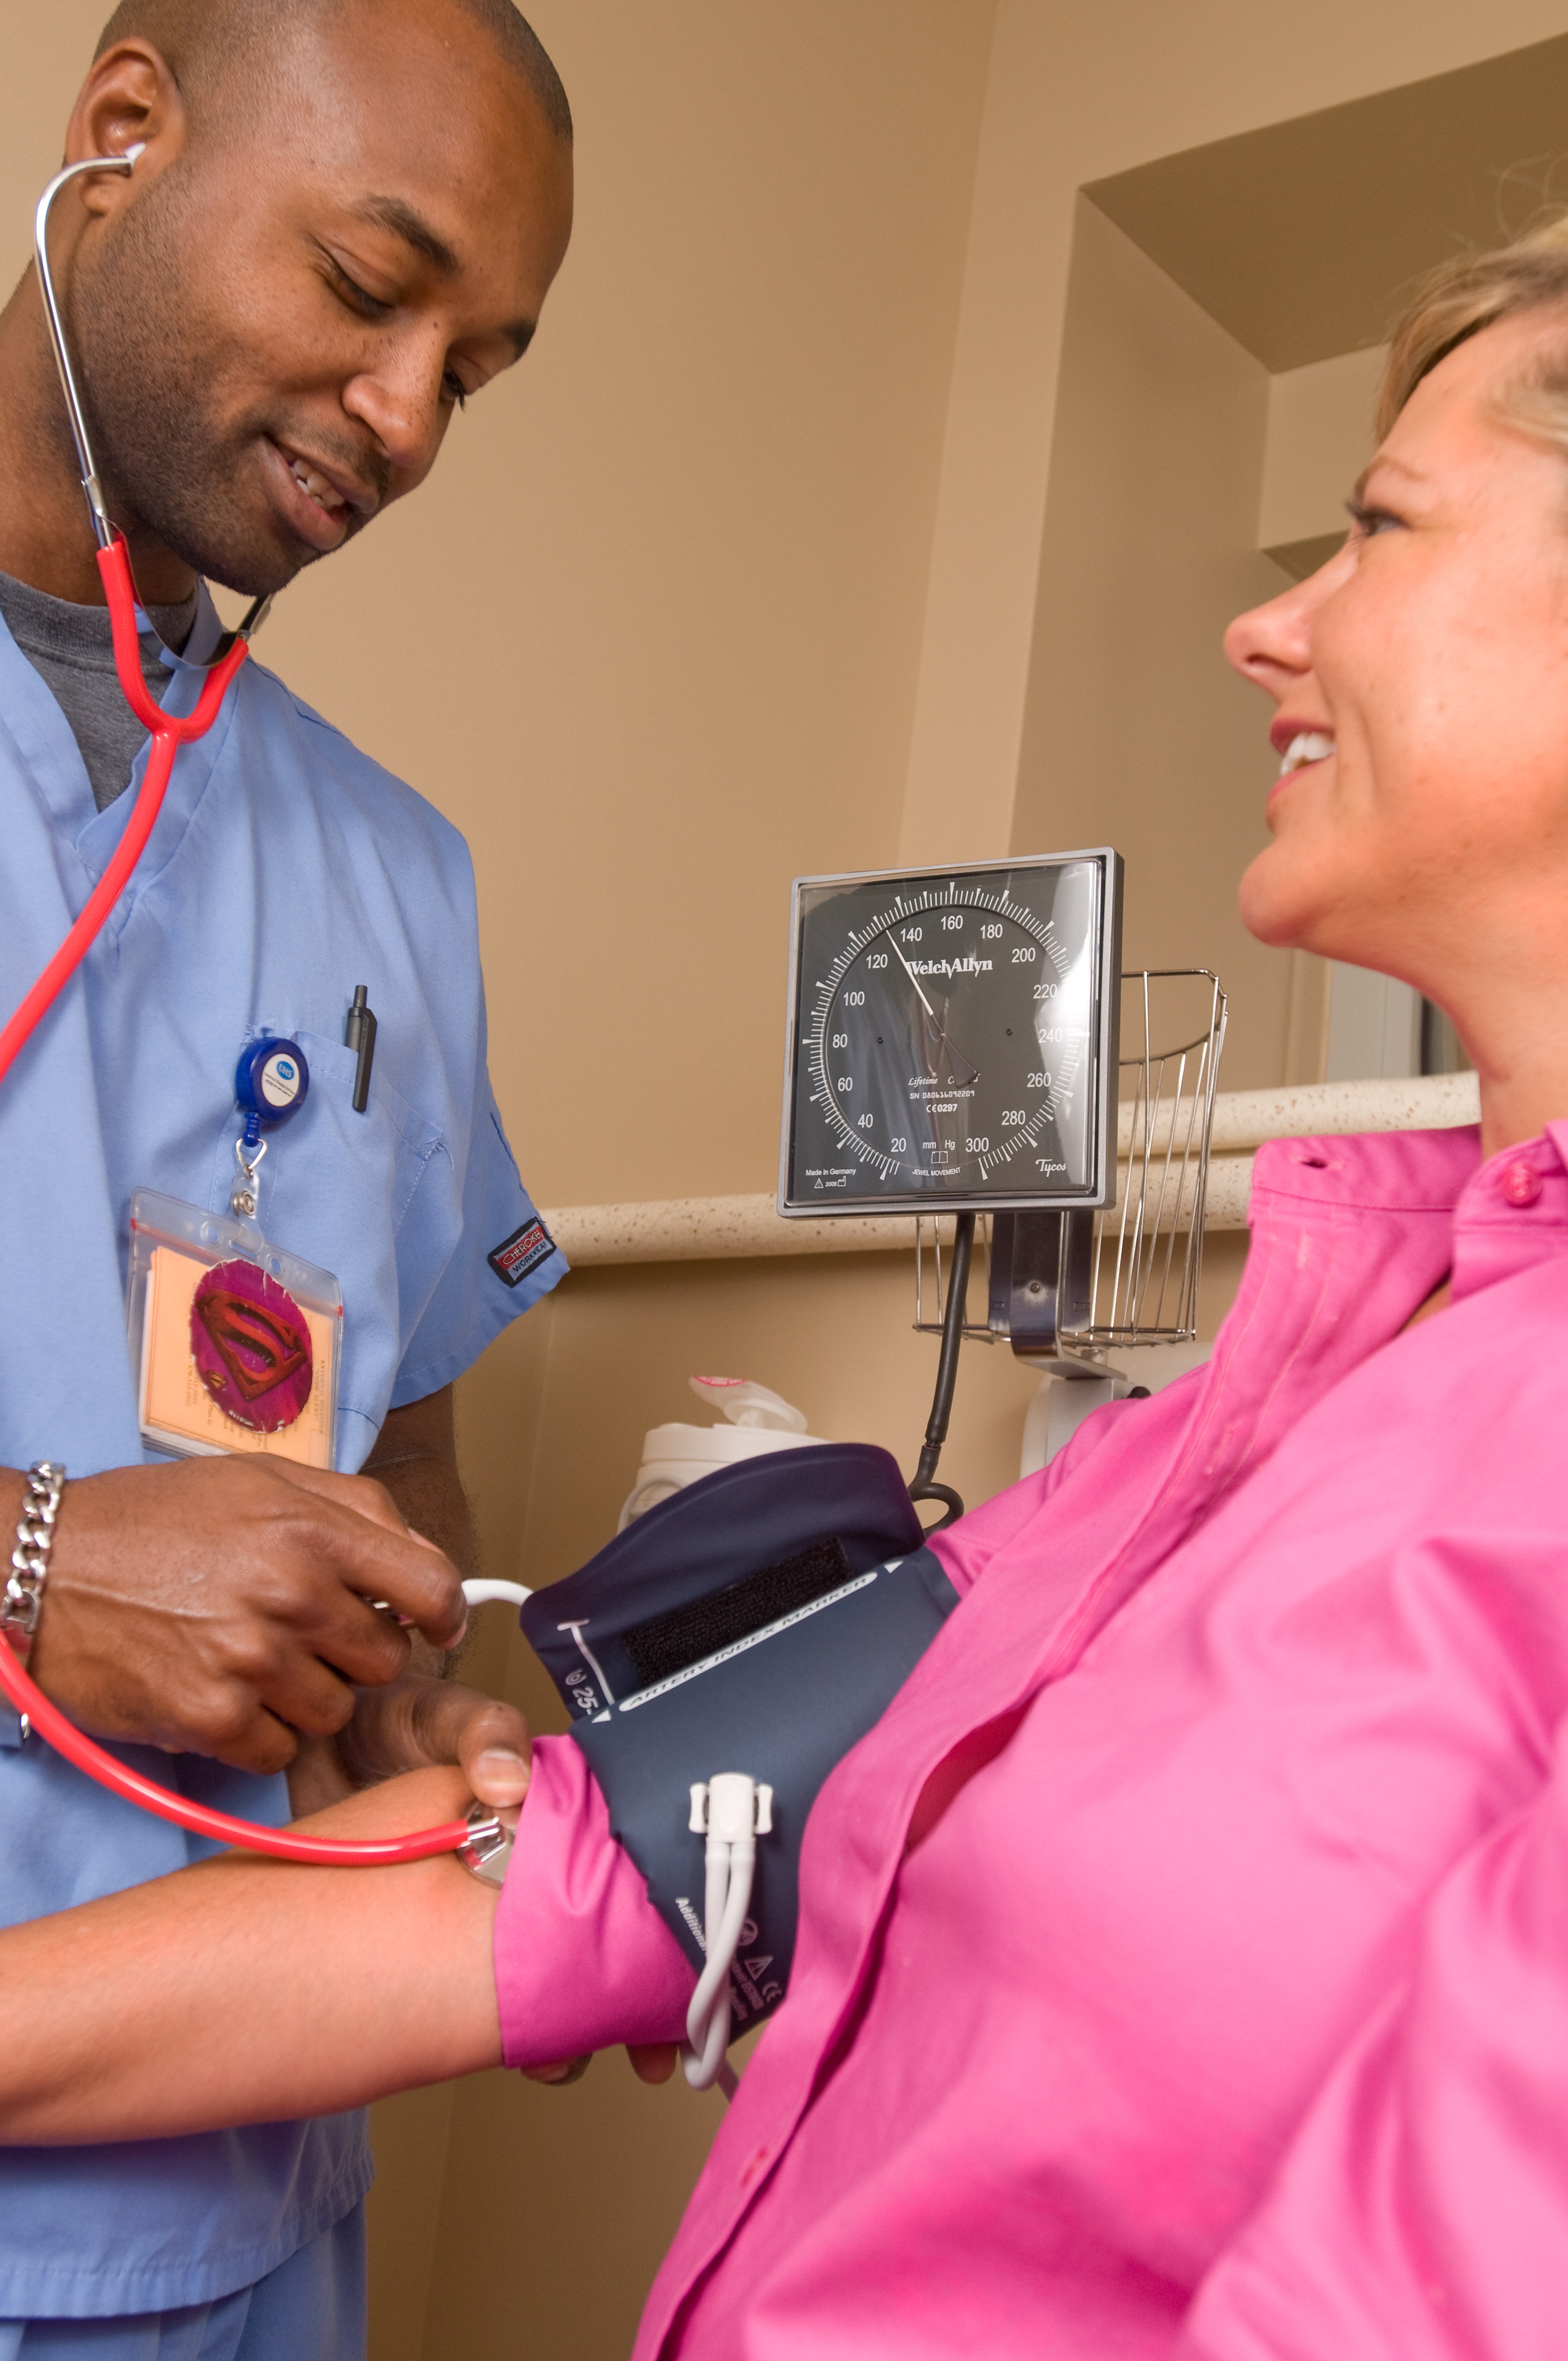 A stock image of a healthcare professional taking the blood pressure of a woman/patient.